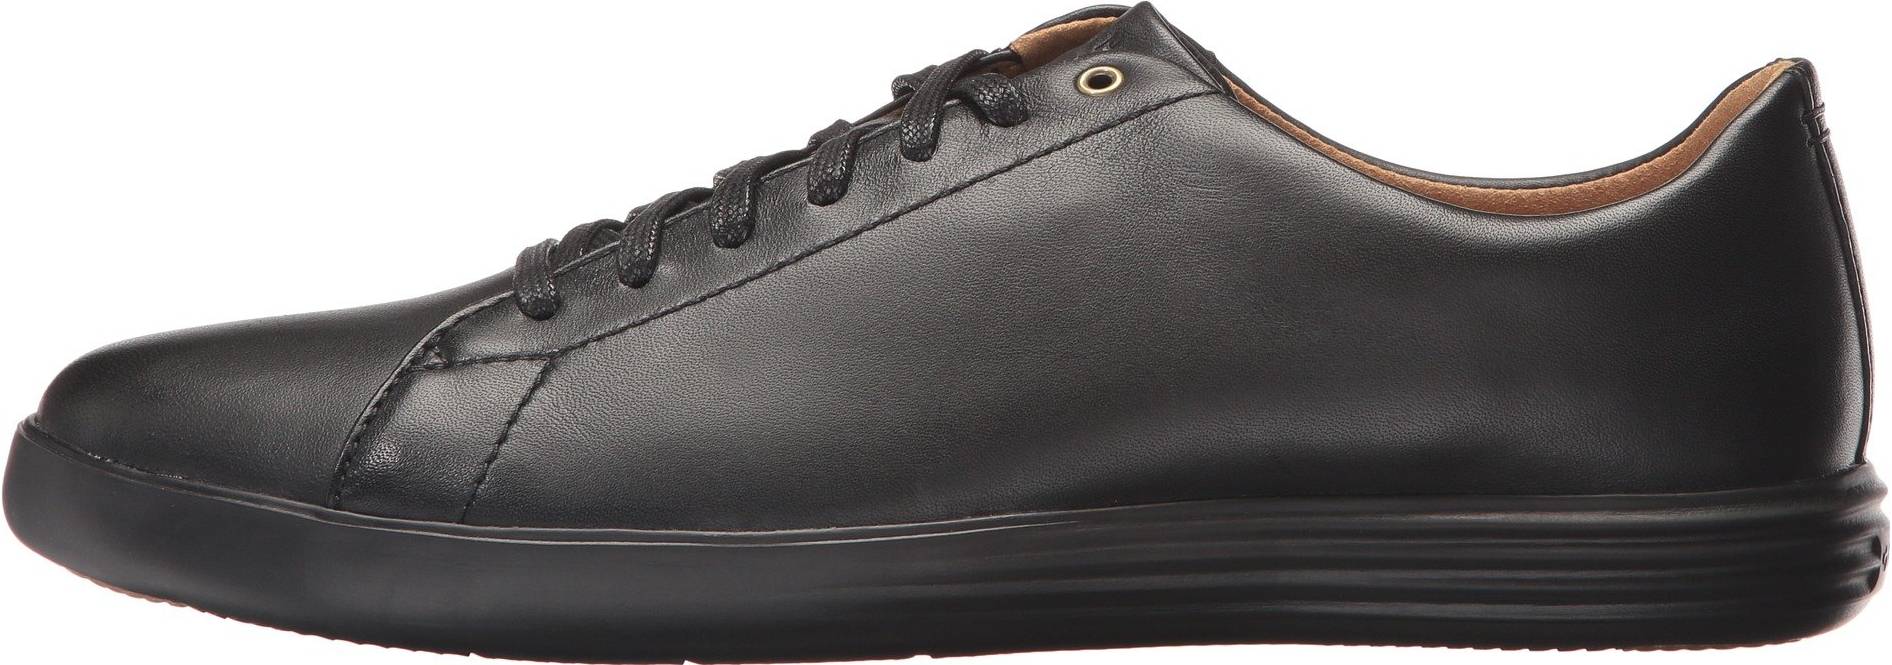 10+ Cole Haan leather sneakers: Save up to 51% | RunRepeat